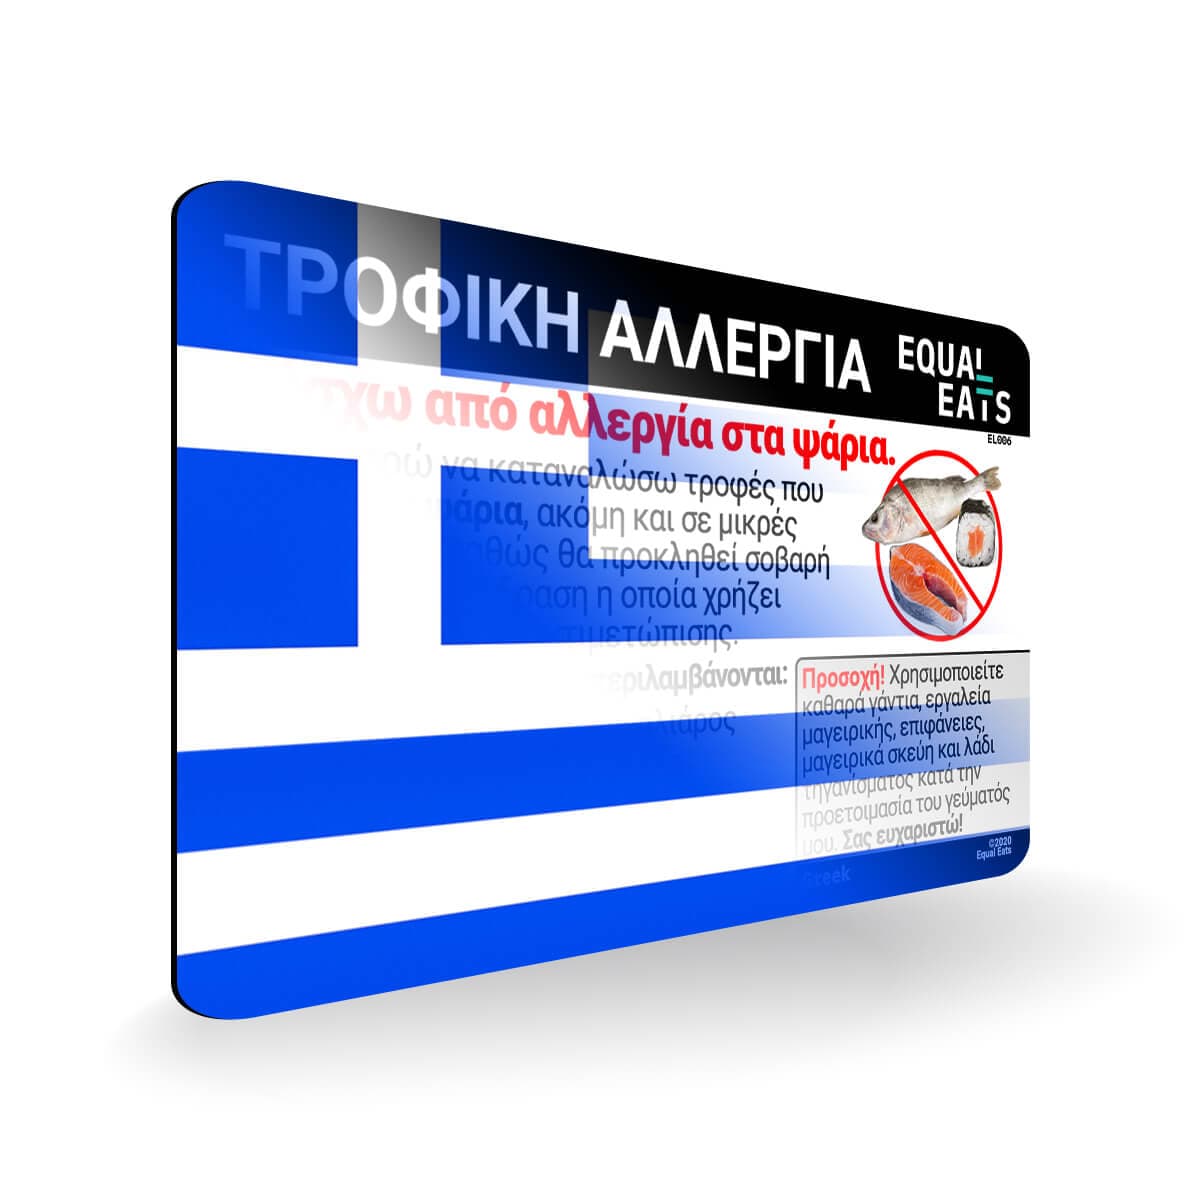 Fish Allergy in Greek. Fish Allergy Card for Greece